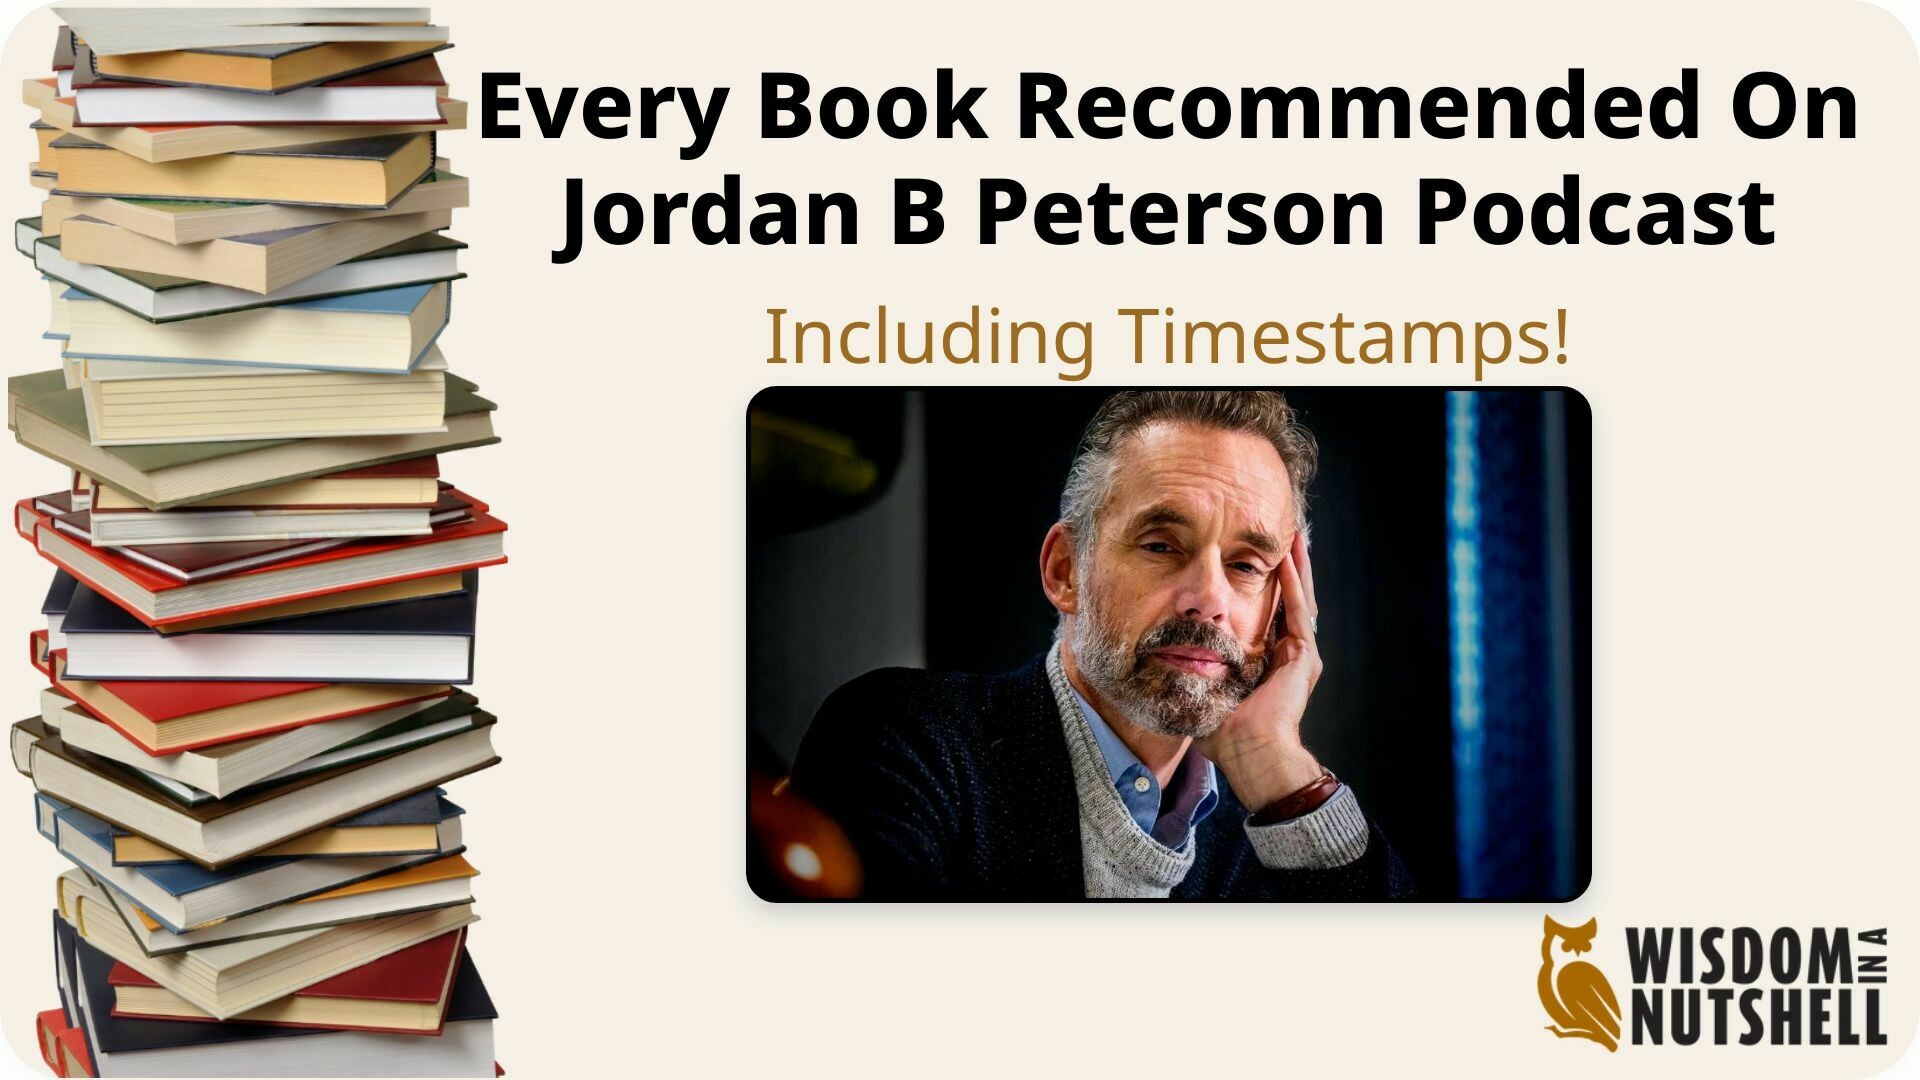 Every Book Recommended on the Jordan B Peterson Podcast